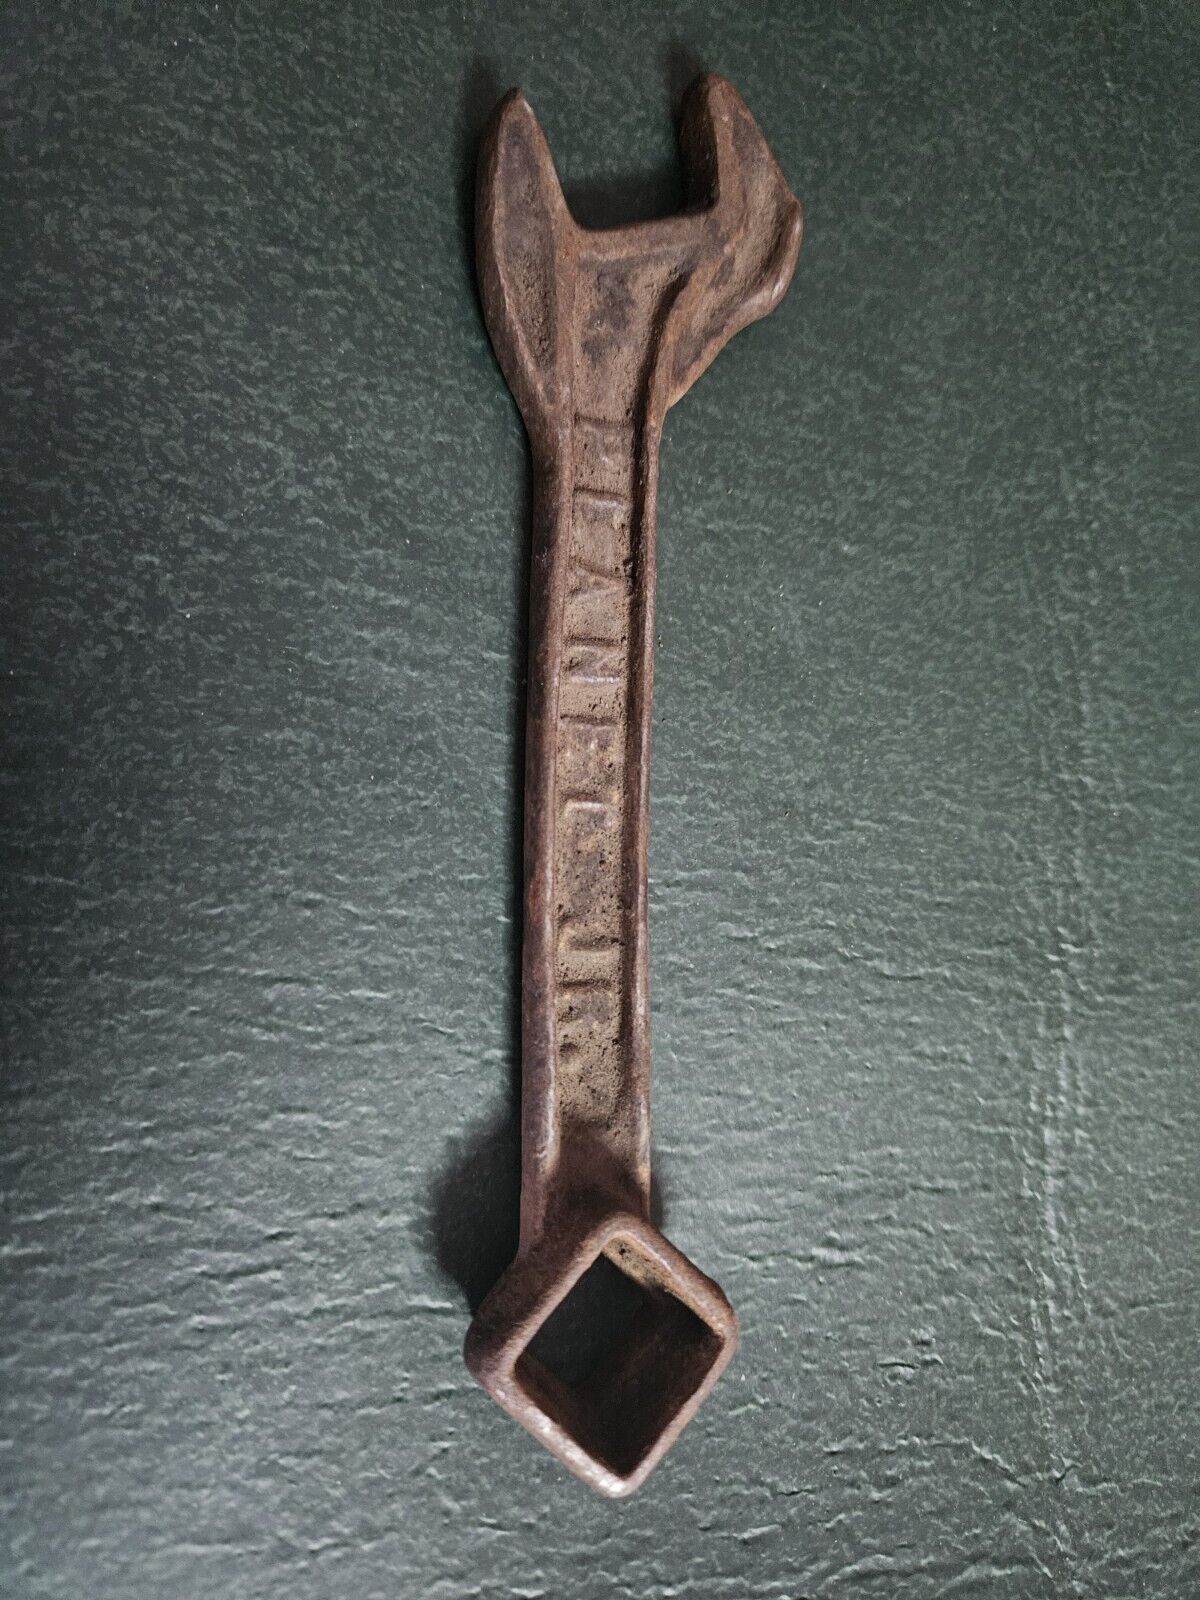 Vintage Planet Jr. No. 3 Wrench Made in the United States of America